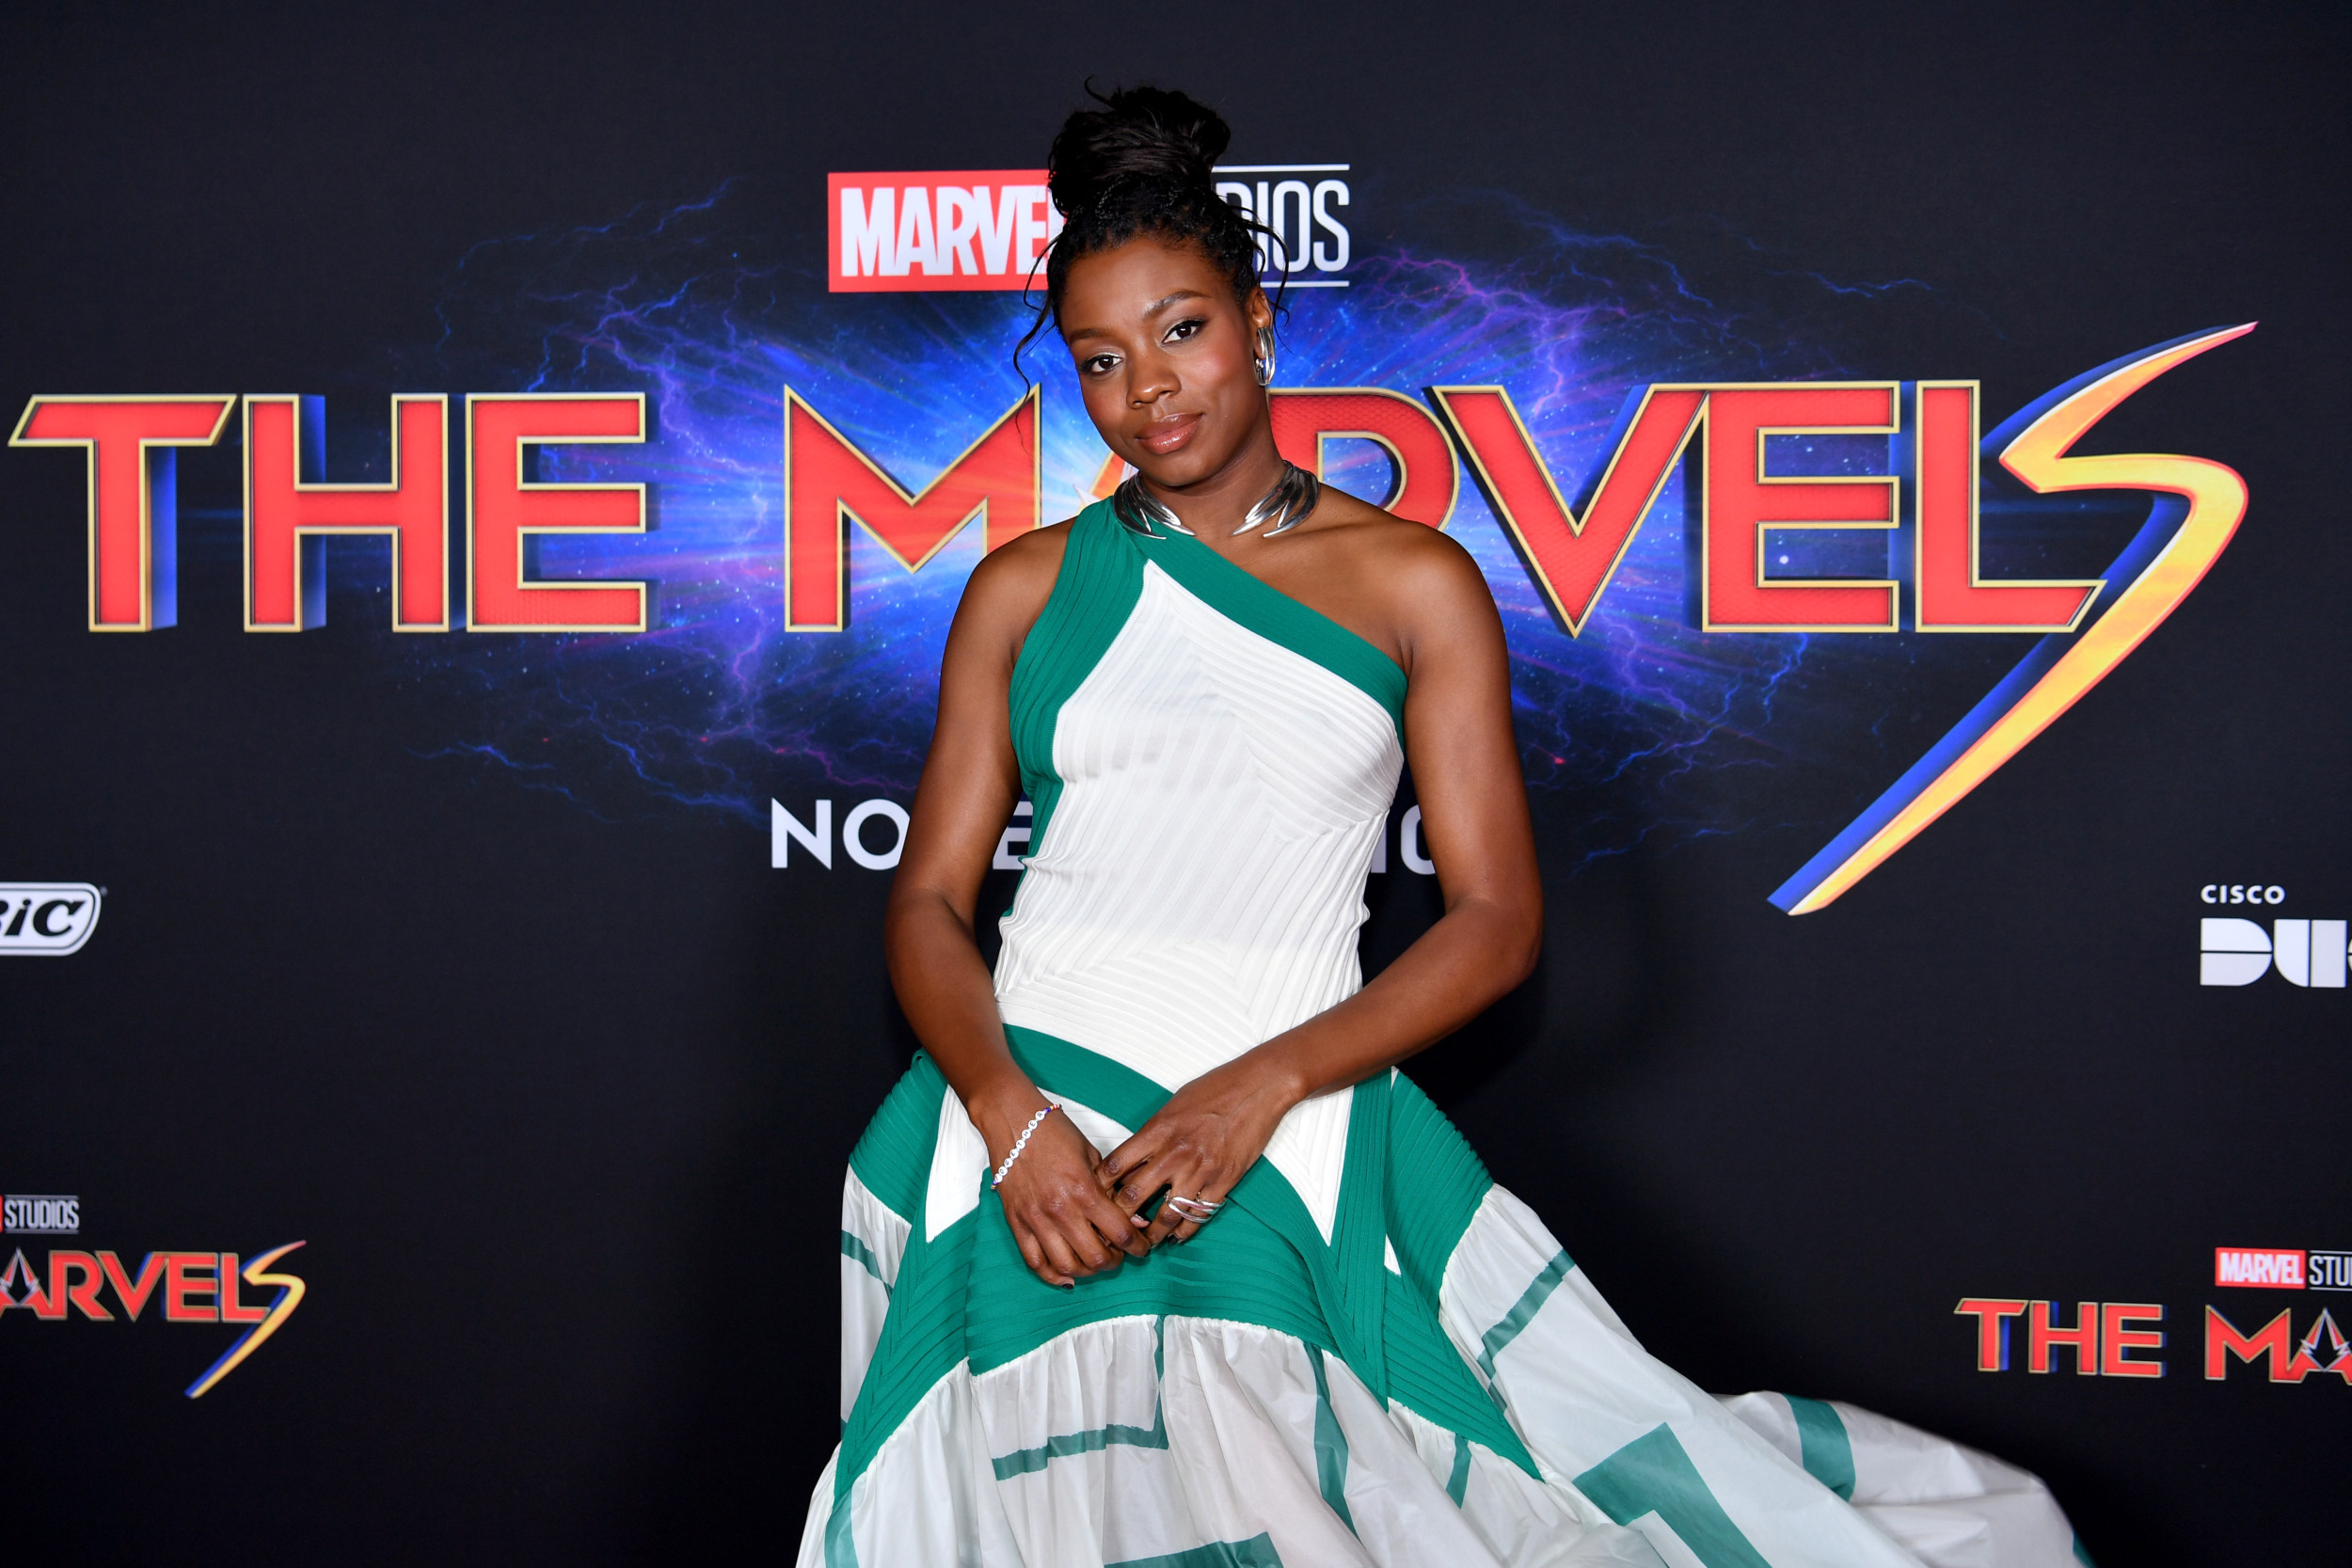 Nia DaCosta Doesn't Deserve Blame for The Marvels' Box Office